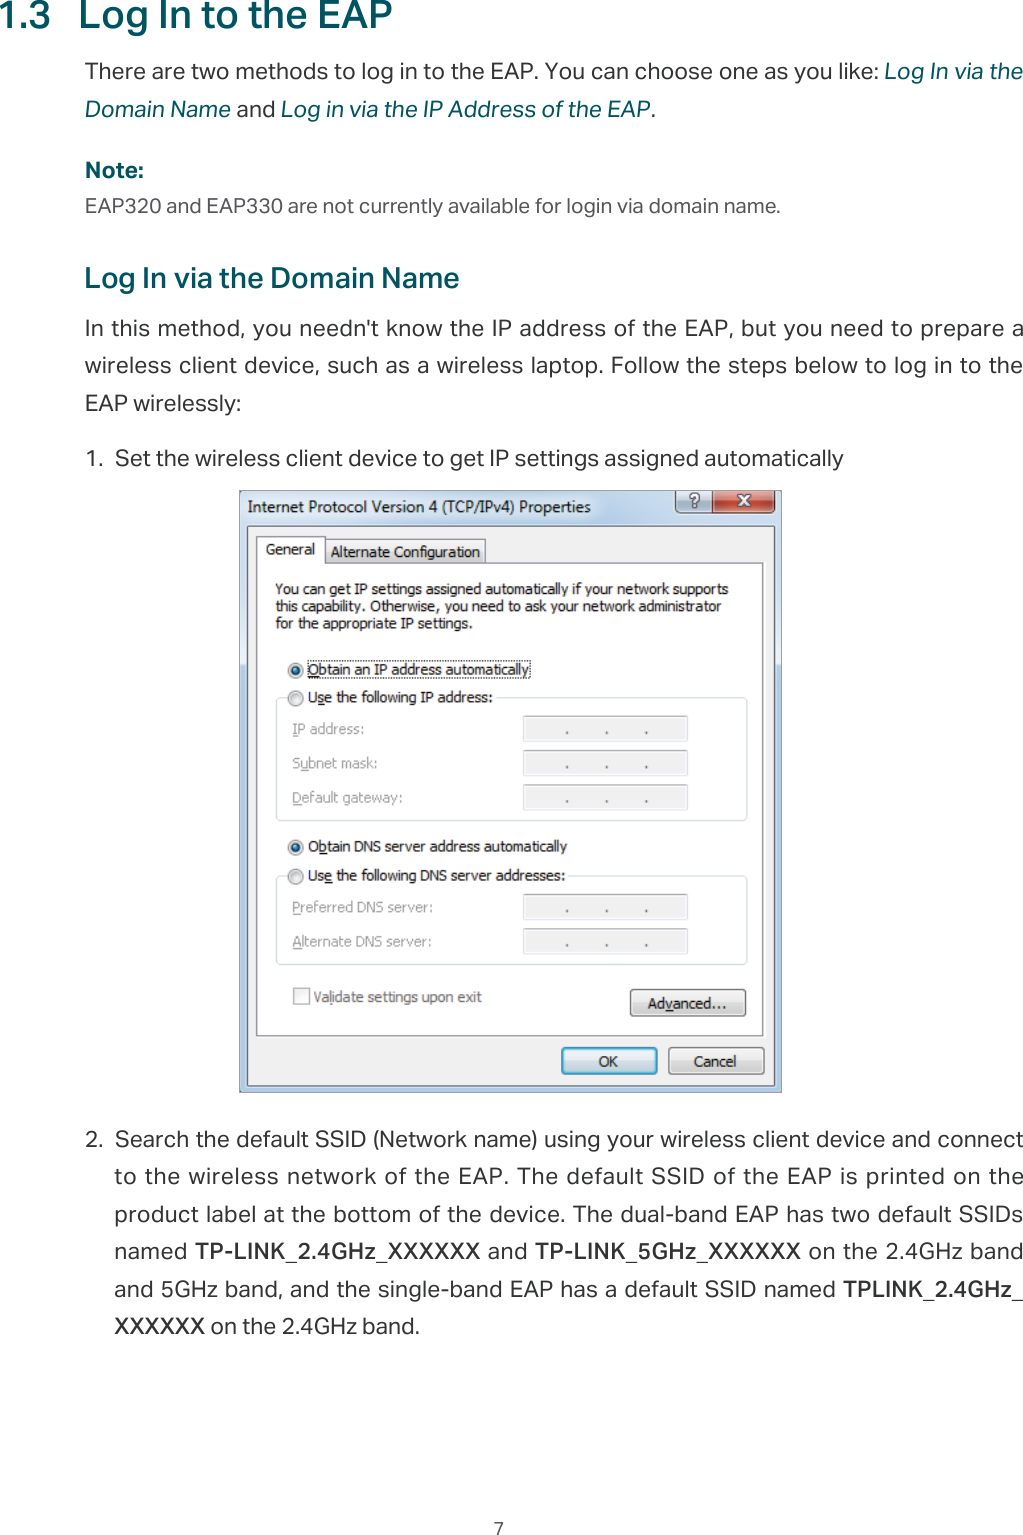  71.3  Log In to the EAPThere are two methods to log in to the EAP. You can choose one as you like: Log In via the Domain Name and Log in via the IP Address of the EAP.Note:EAP320 and EAP330 are not currently available for login via domain name.Log In via the Domain NameIn this method, you needn&apos;t know the IP address of the EAP, but you need to prepare a wireless client device, such as a wireless laptop. Follow the steps below to log in to the EAP wirelessly:1. Set the wireless client device to get IP settings assigned automatically2. Search the default SSID (Network name) using your wireless client device and connect to the wireless network of the EAP. The default SSID of the EAP is printed on the product label at the bottom of the device. The dual-band EAP has two default SSIDs named TP-LINK_2.4GHz_XXXXXX and TP-LINK_5GHz_XXXXXX on the 2.4GHz band and 5GHz band, and the single-band EAP has a default SSID named TPLINK_2.4GHz_XXXXXX on the 2.4GHz band.